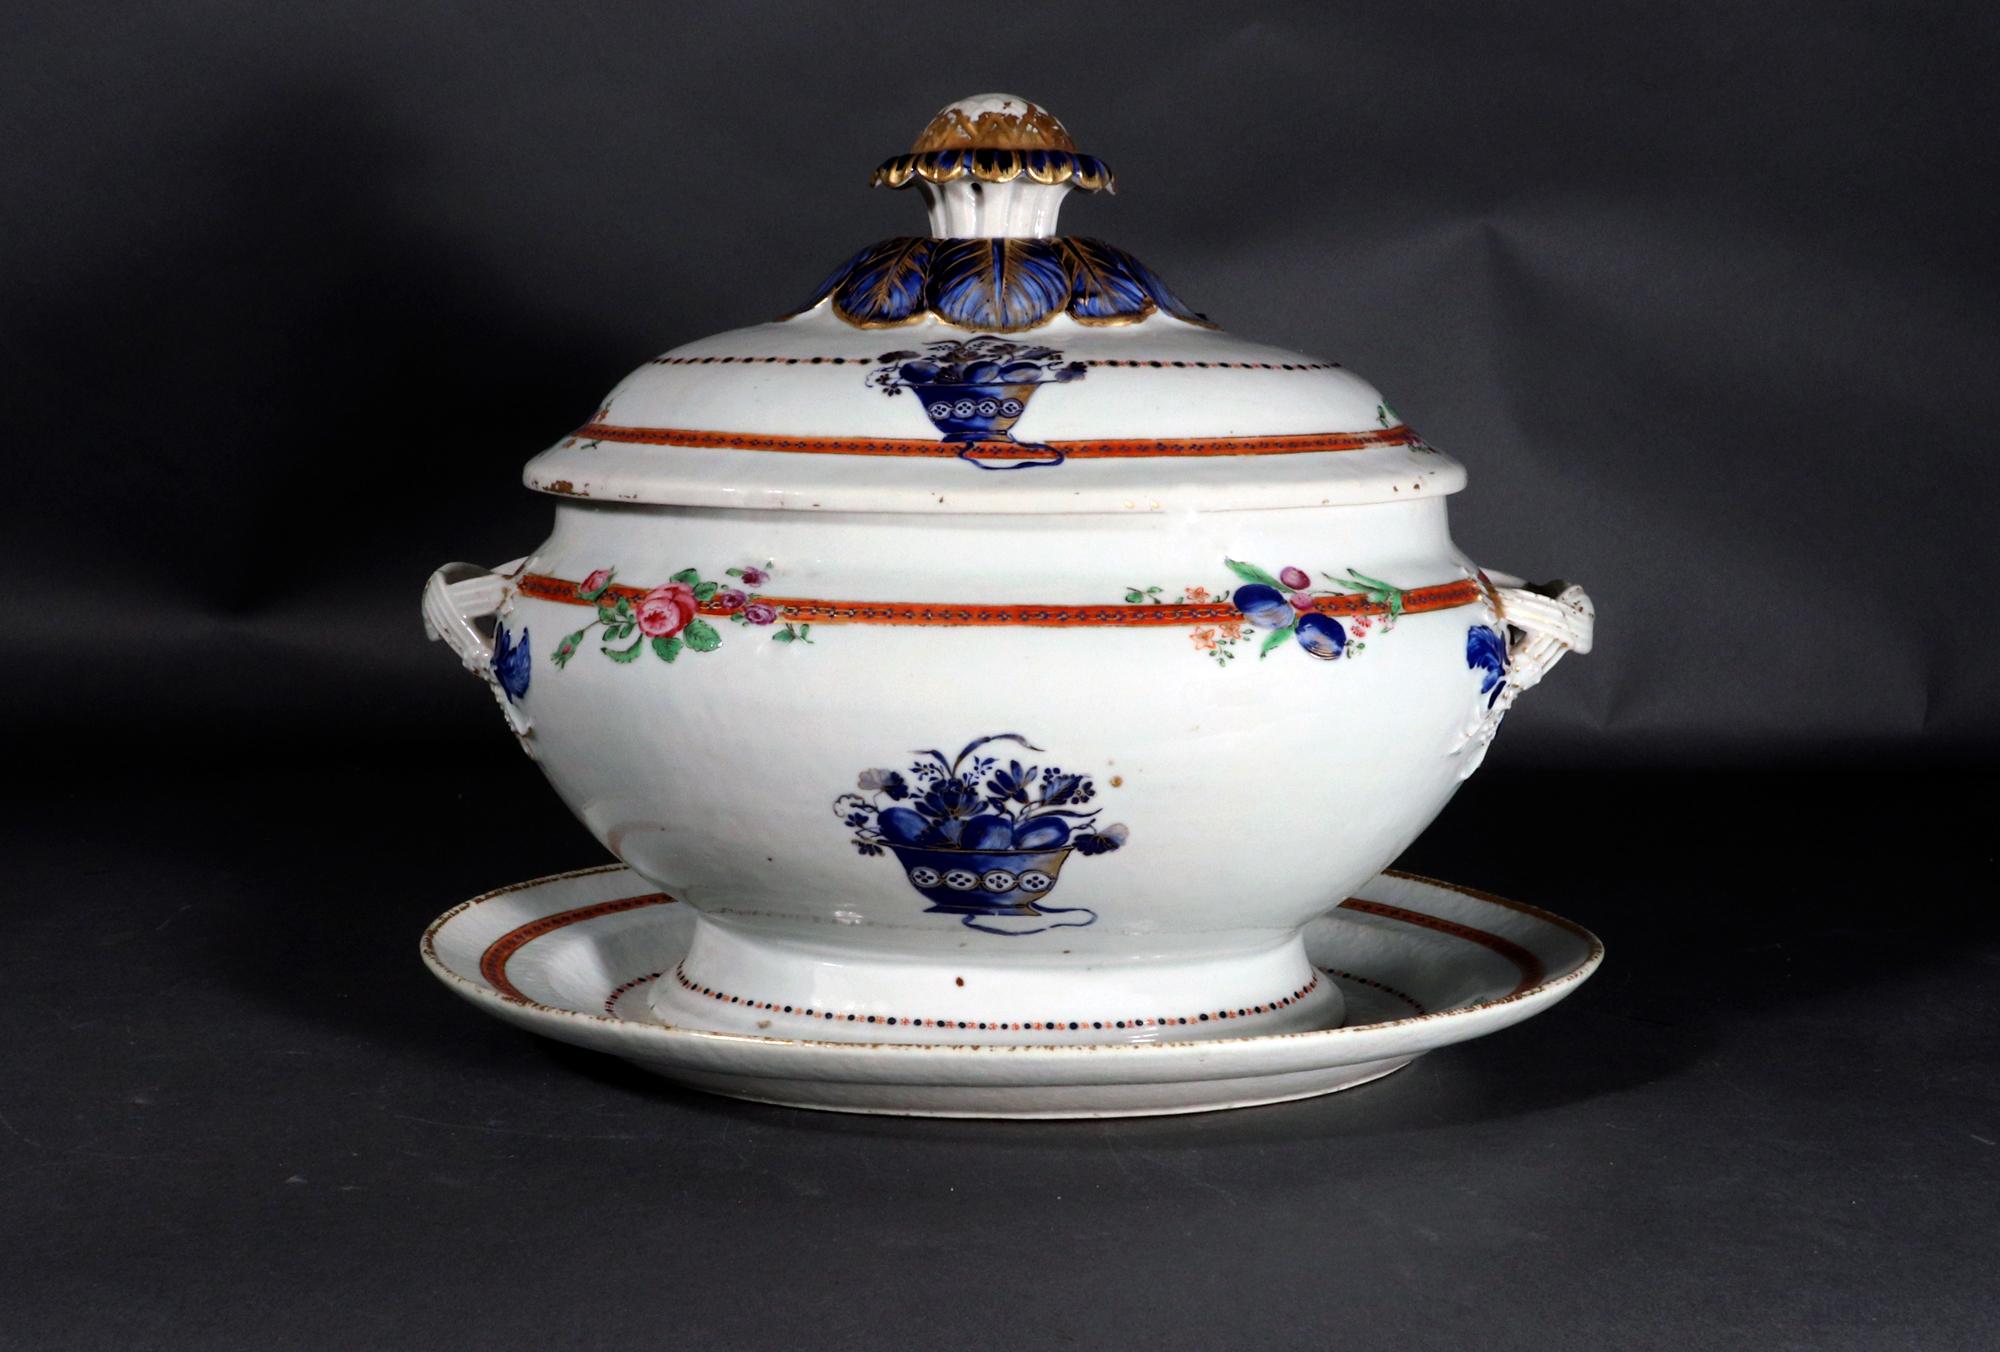 Chinese Export Porcelain American Market Soup Tureen, Cover and Stand For Sale 2